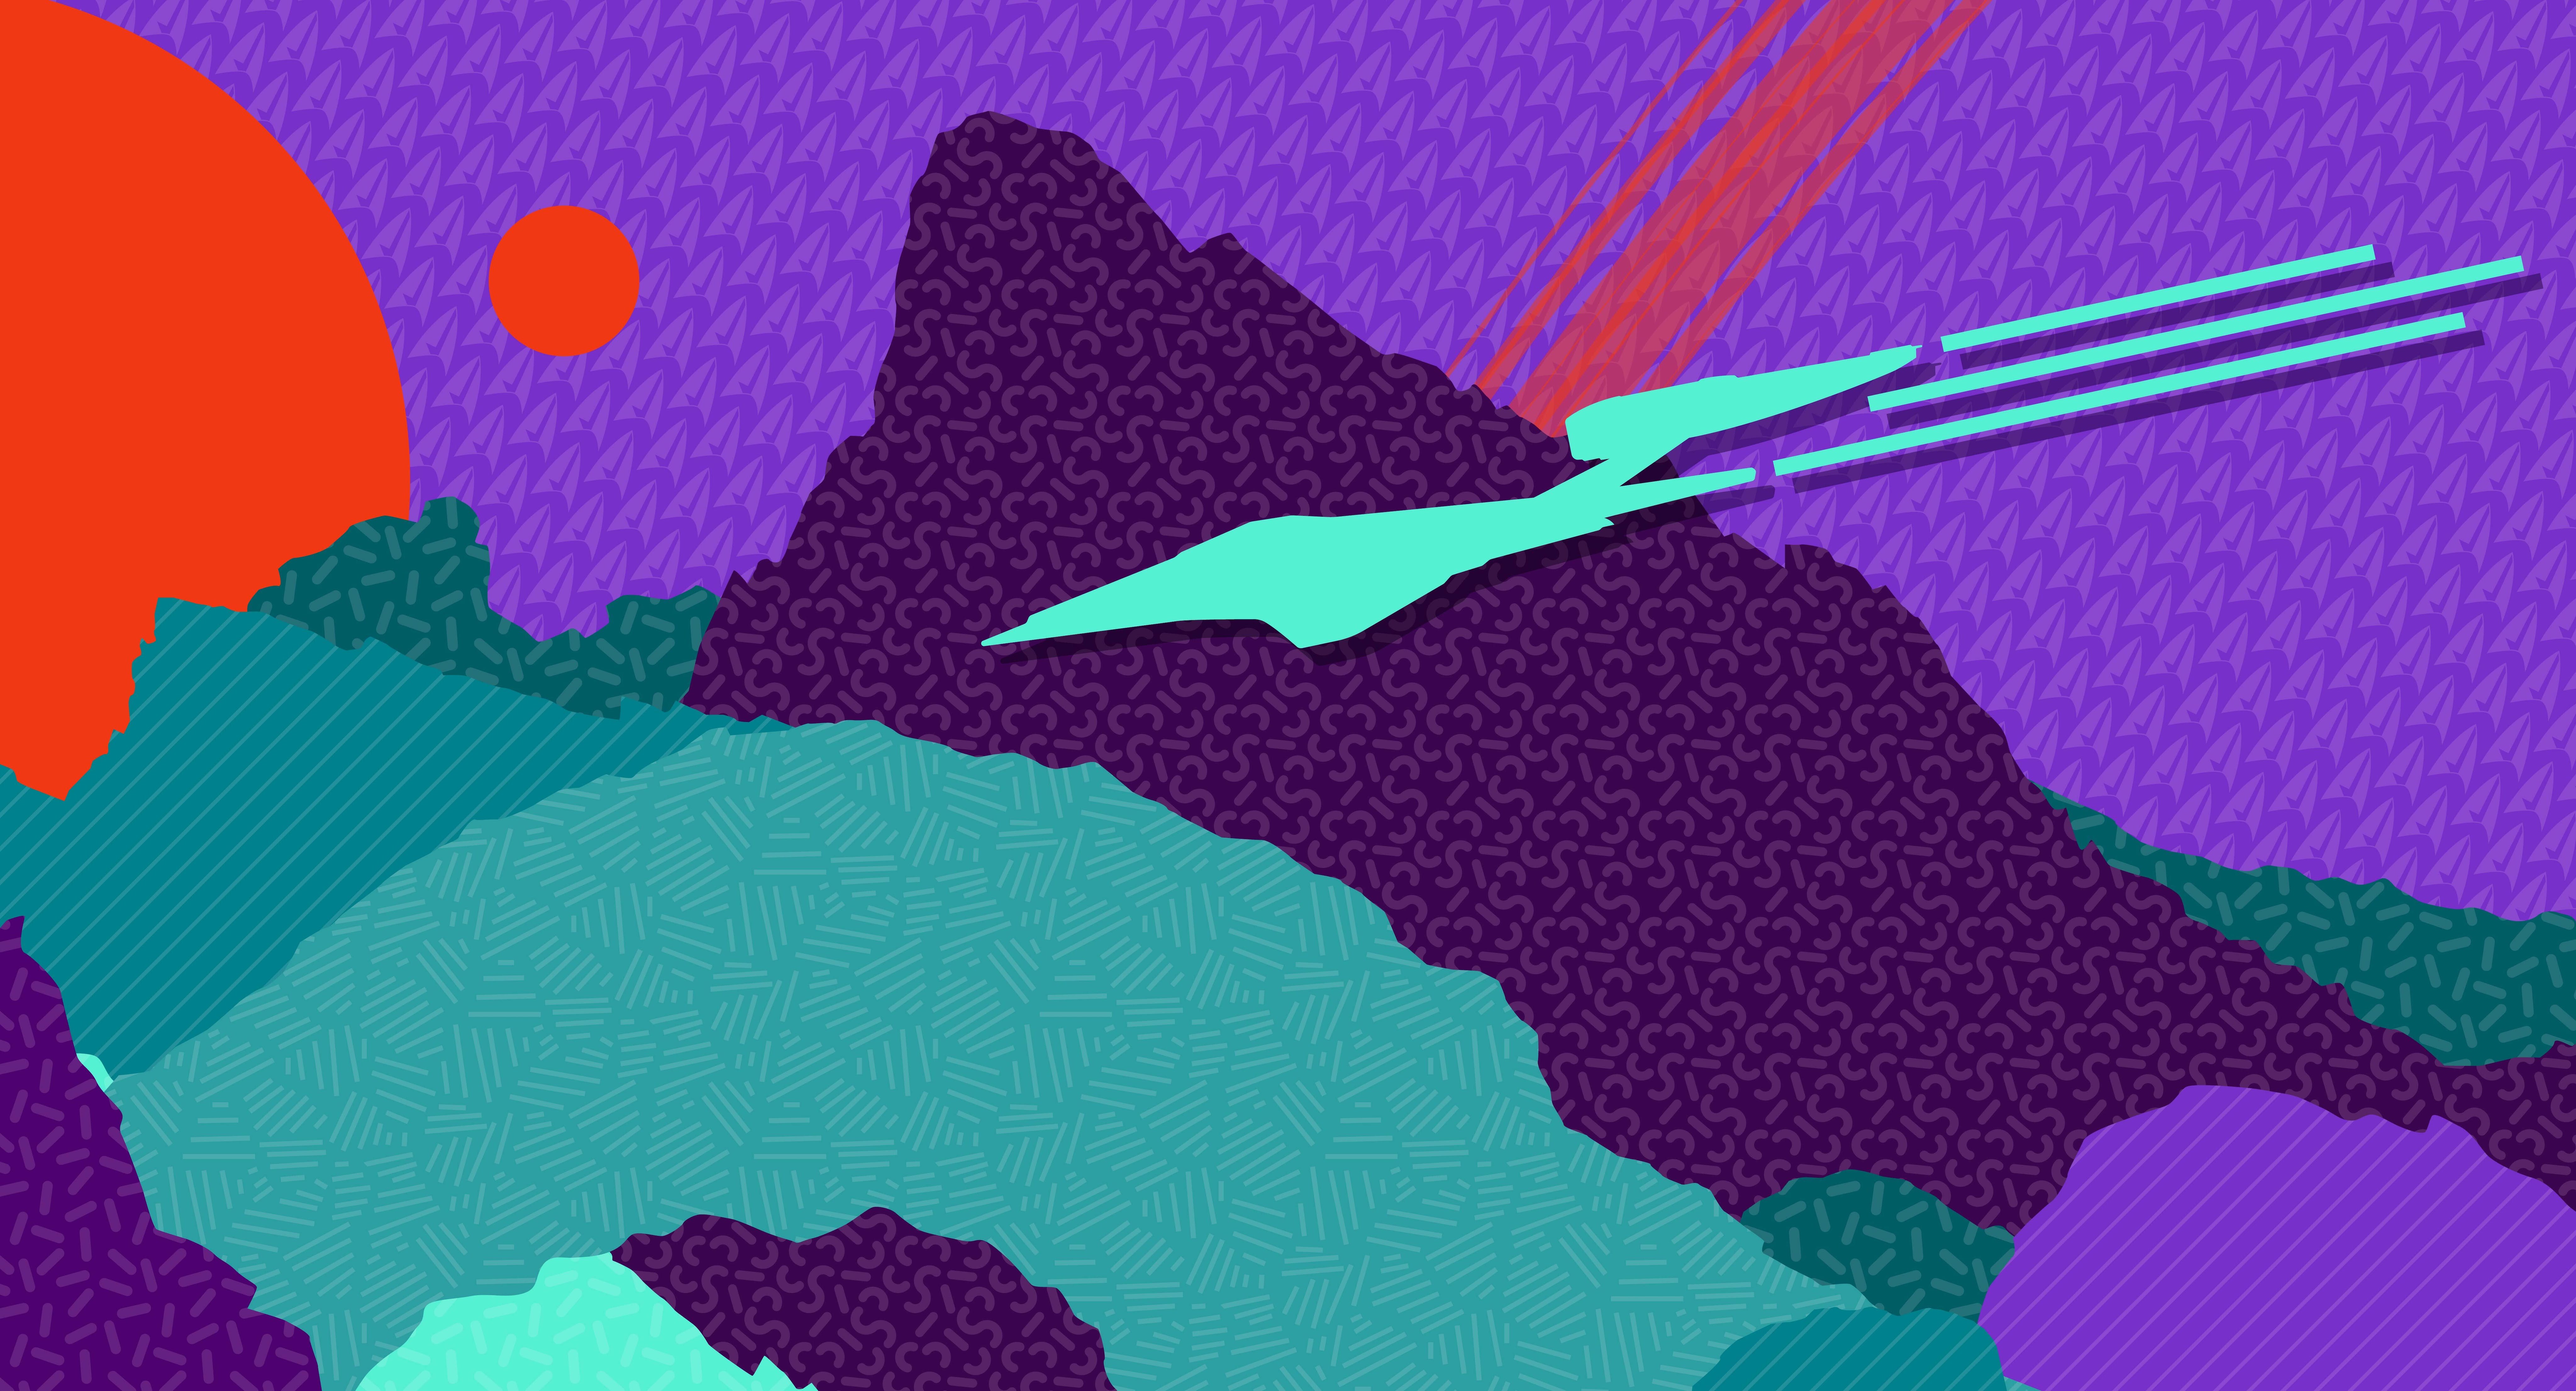 A graphic of a mountain with a spaceship flying over it - Star Trek, vector